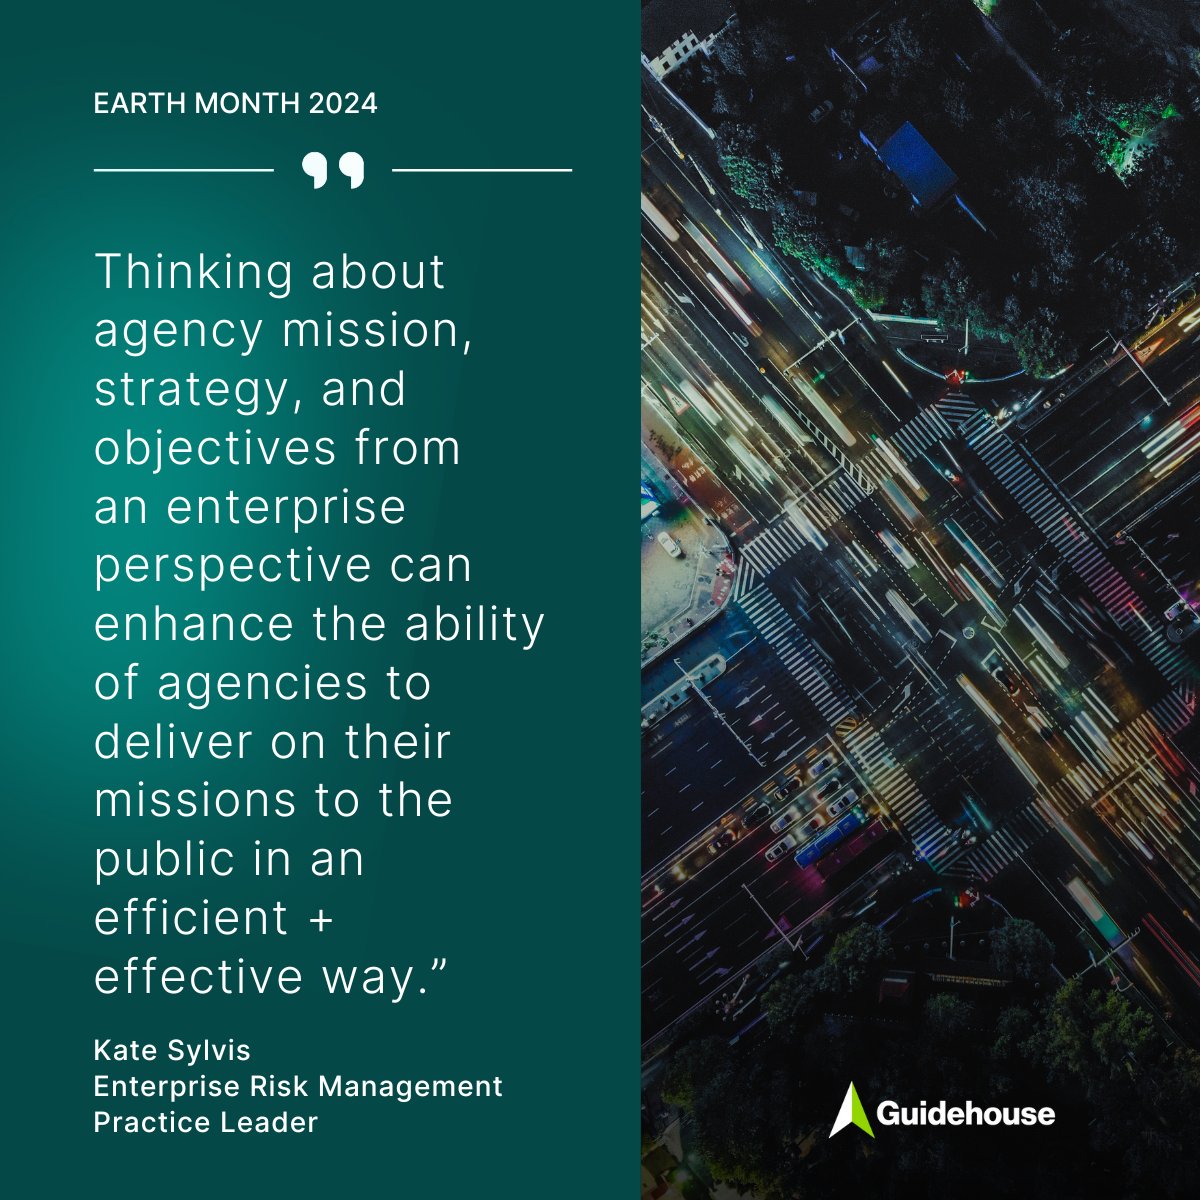 ESG has come to represent a set of topics organizations use to manage and report on their operations including supply chain resiliency, carbon footprints and more. Discover our expert's insights: guidehouse.com/insights/energ… #EarthMonth #EarthDay